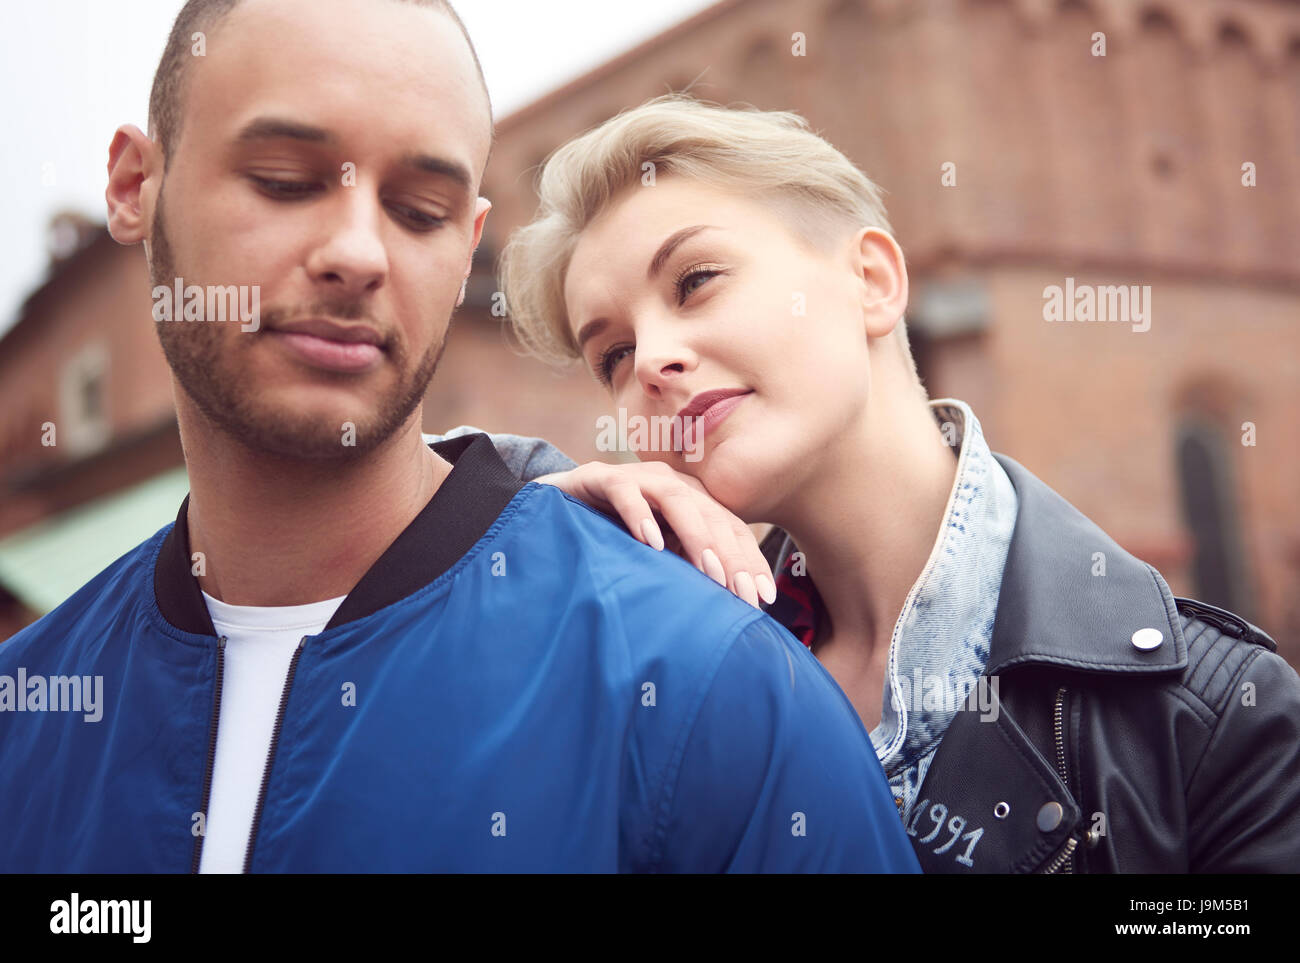 Love him more than anything else Stock Photo